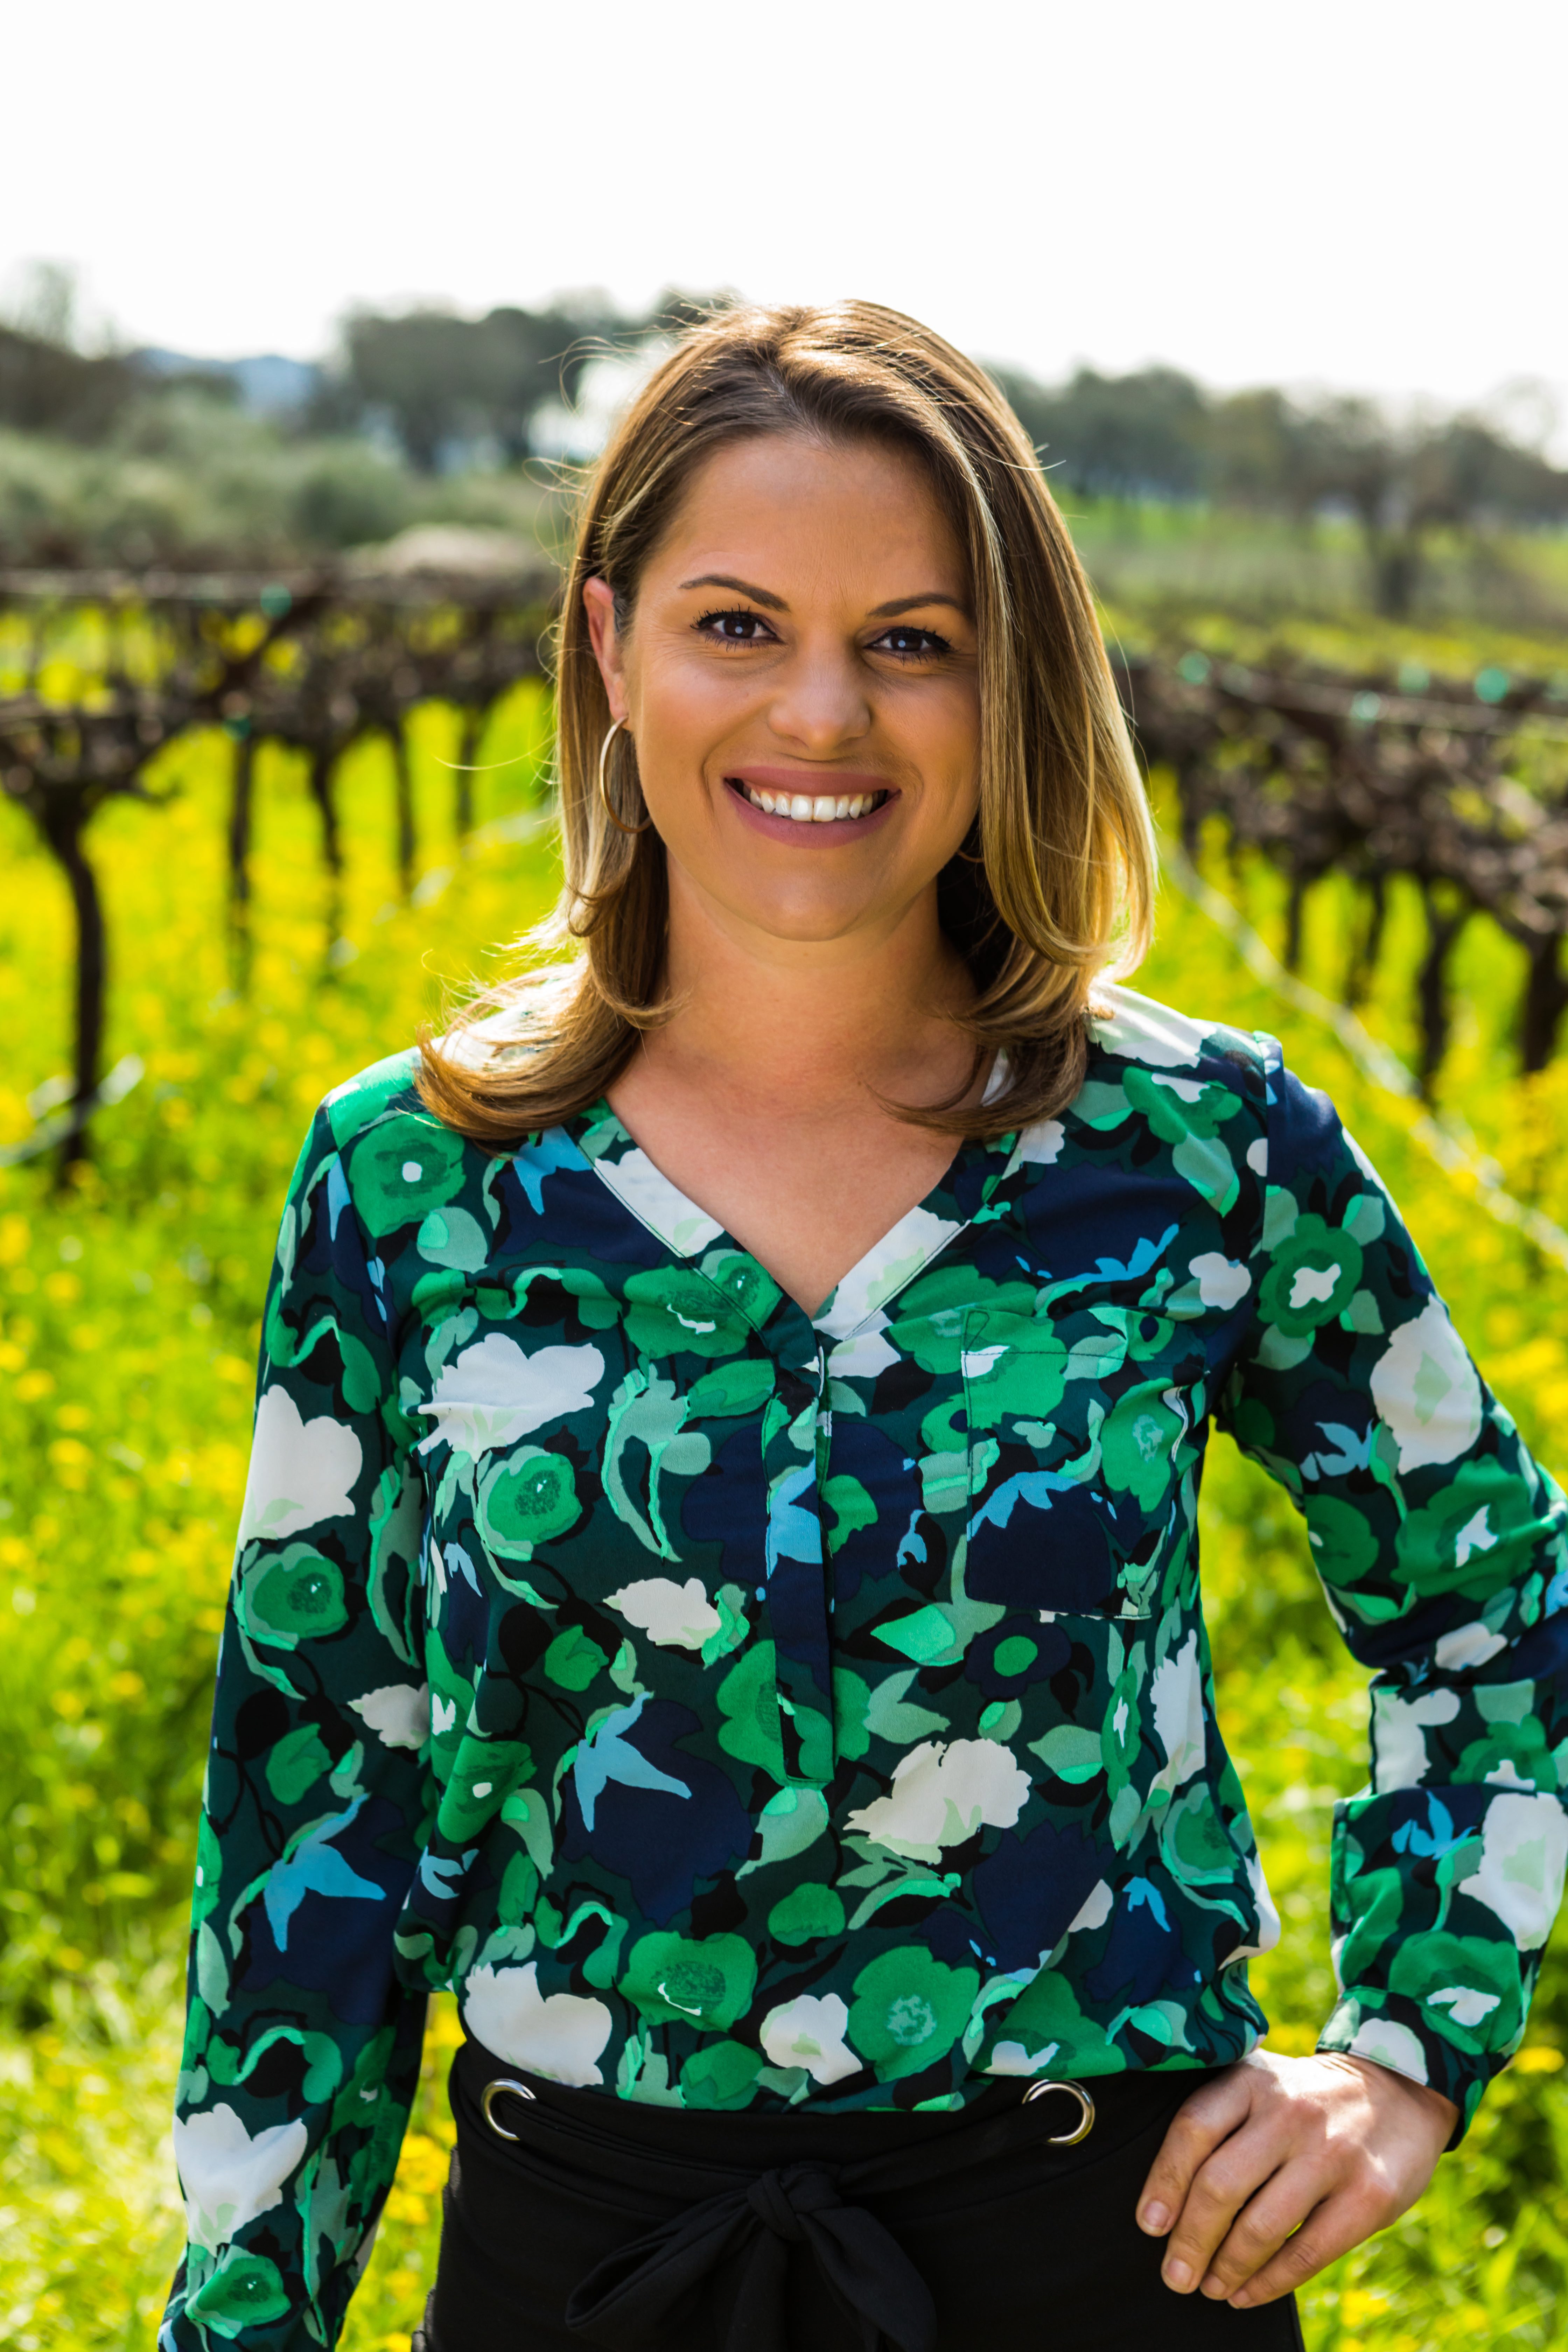 The winery has appointed Leah Zanetell as their new Guest Services & Sales Coordinator to guide guests prior to, during, and after their visit.